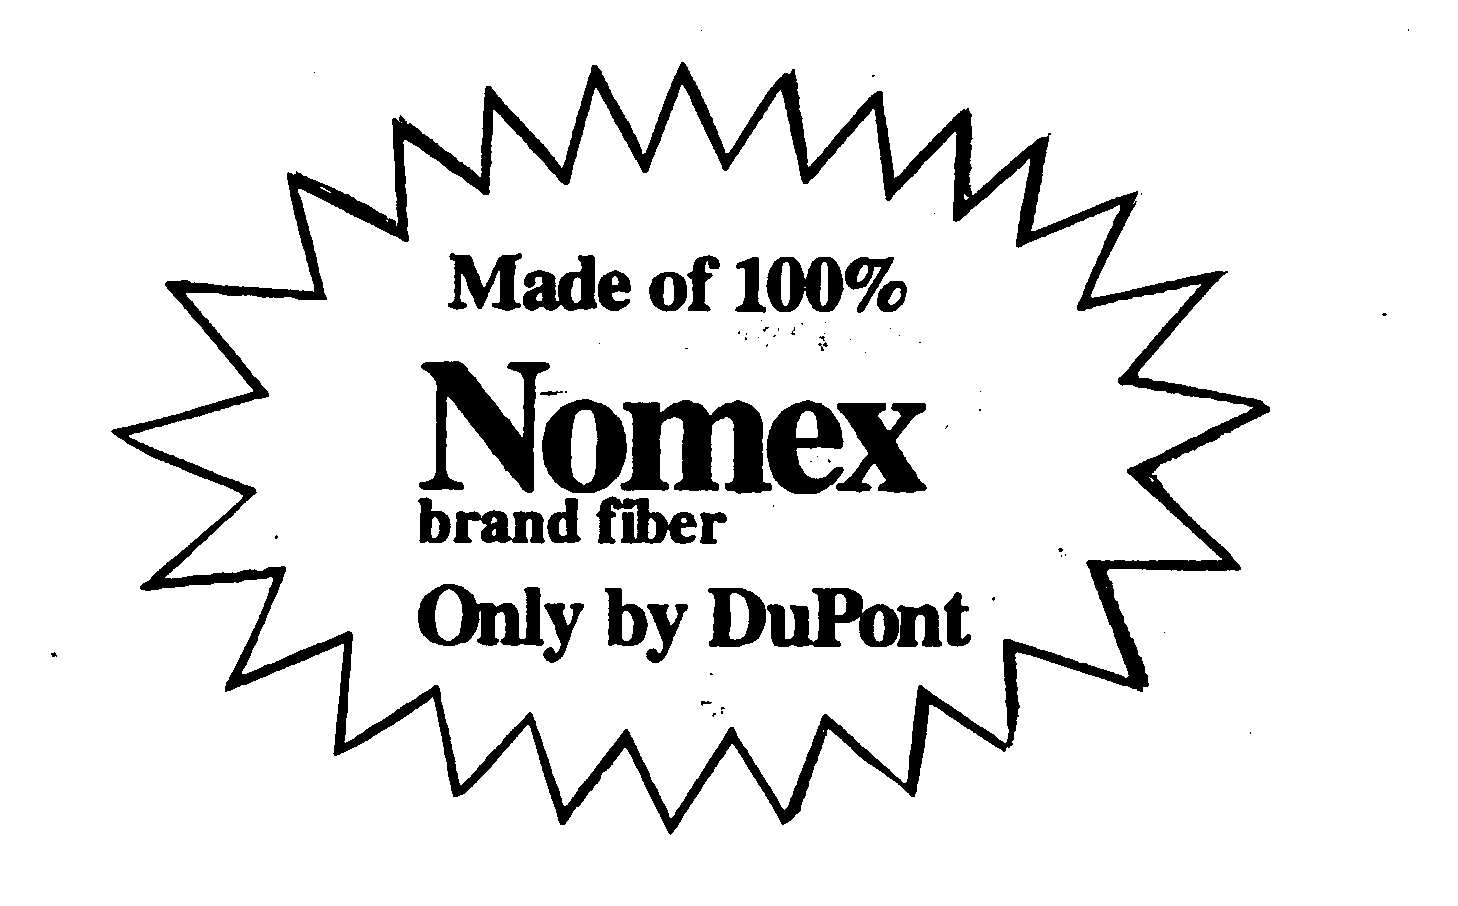 Trademark Logo MADE OF 100% NOMEX BRAND FIBER ONLY BY DUPONT